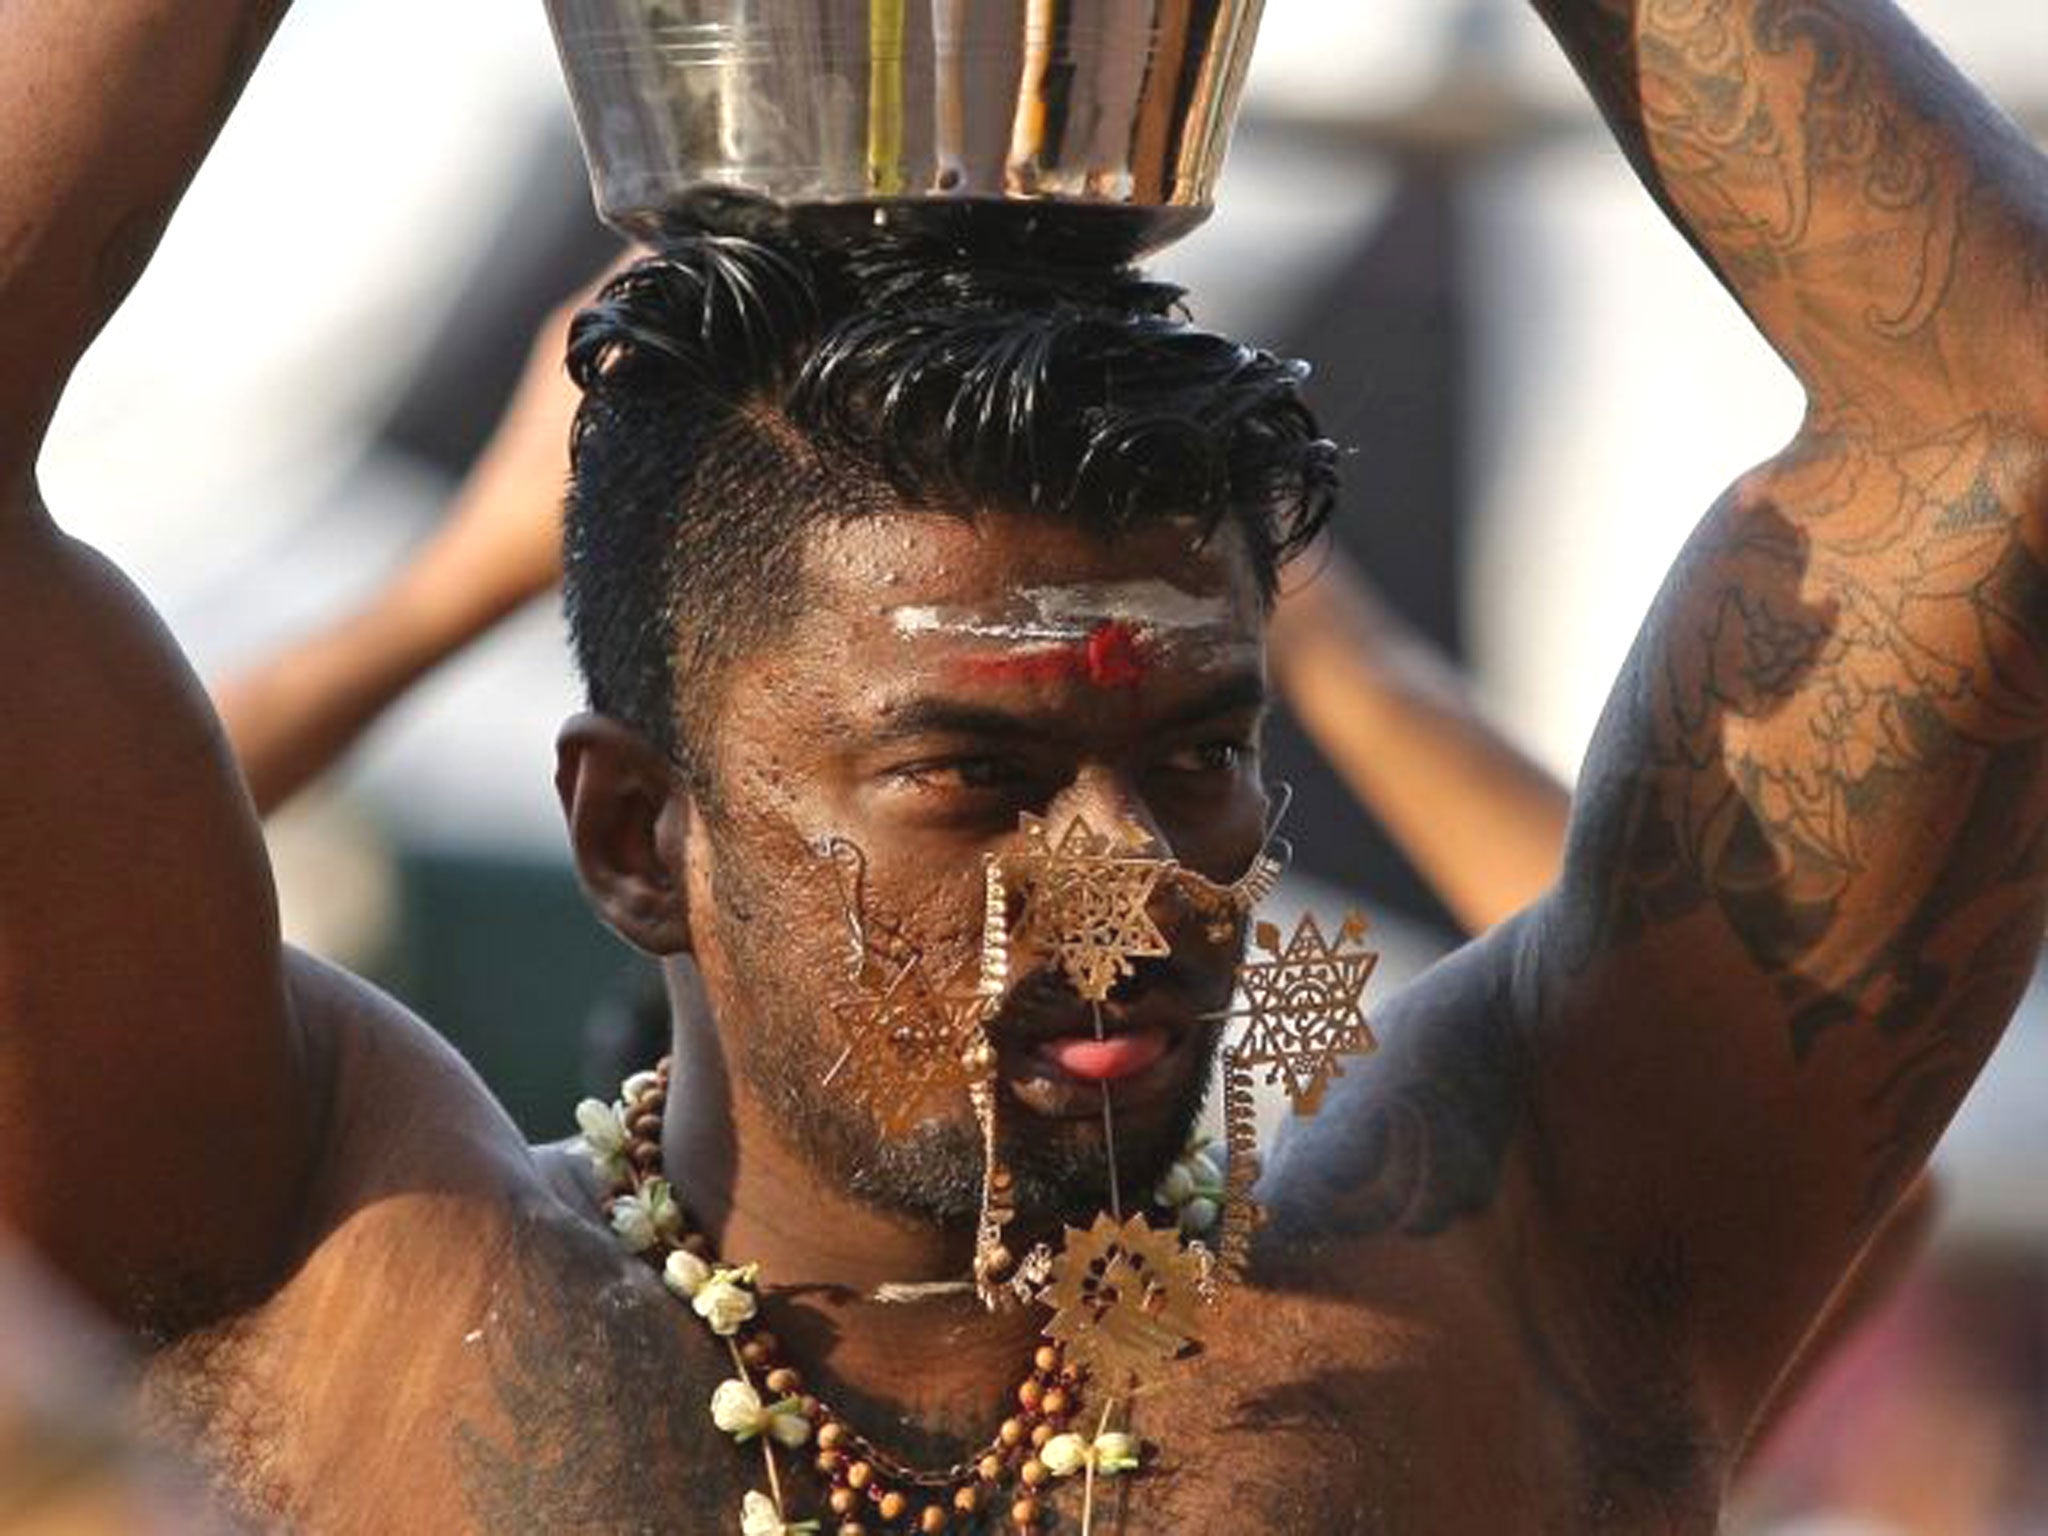 A Hindu devotee with needles protruding his cheeks walks towards the 272 steps taking up to the Batu Caves Temple during the Thaipusam Festival in Kuala Lumpur